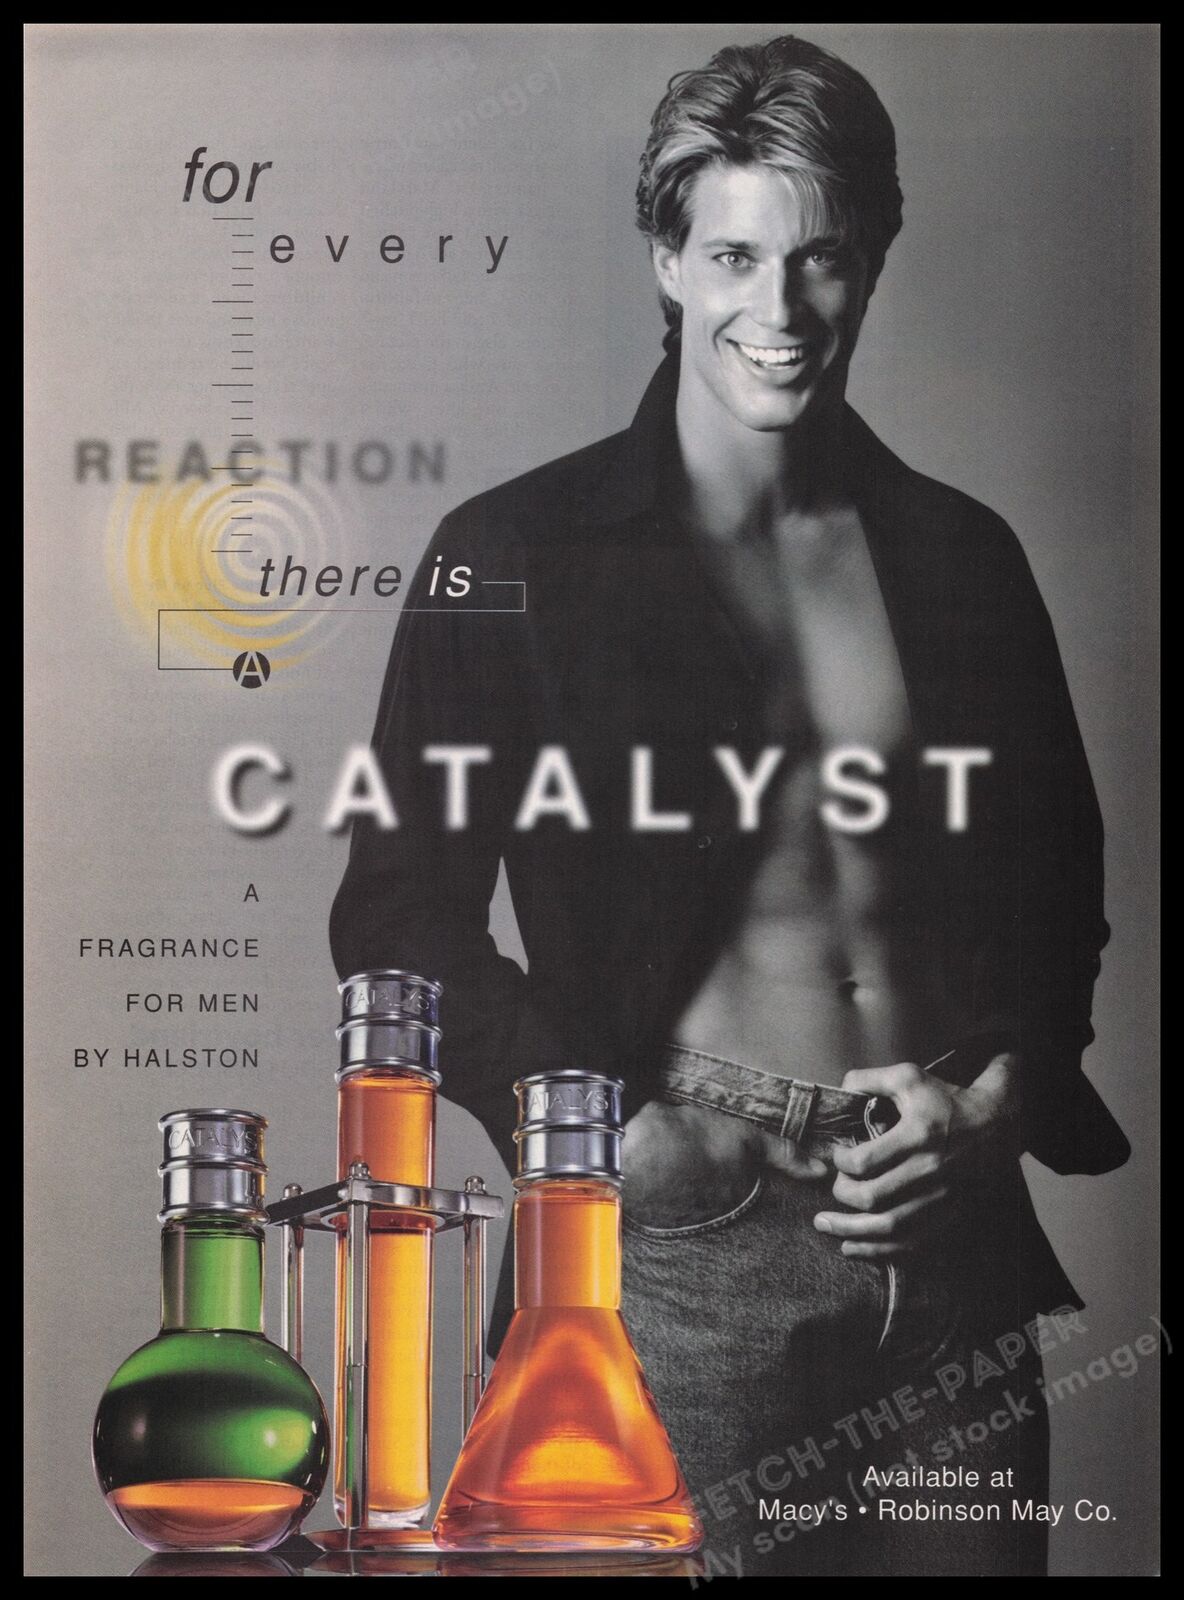 Catalyst Cologne for Men 1990s Print Advertisement Ad 1997 Sexy Male Model